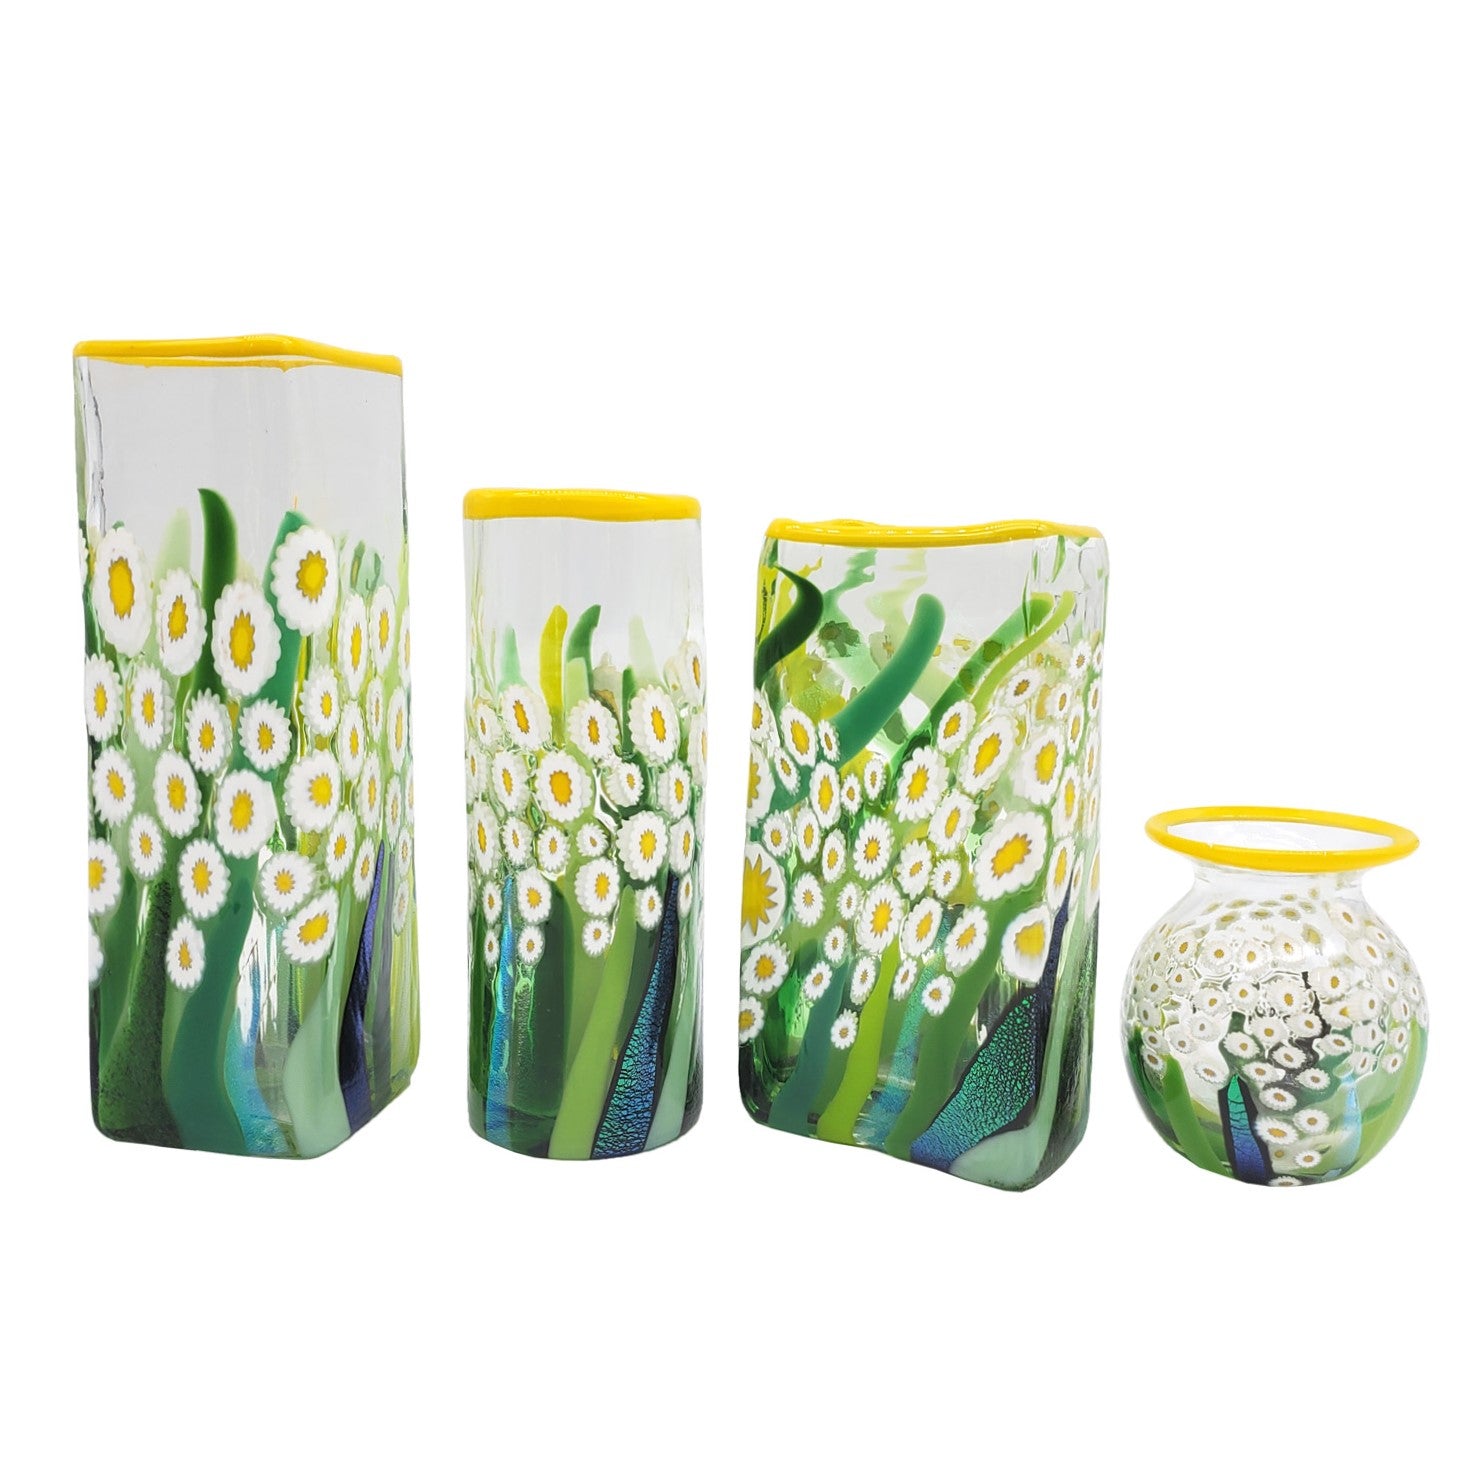 Glass Vase - Daisies with Clear Skies